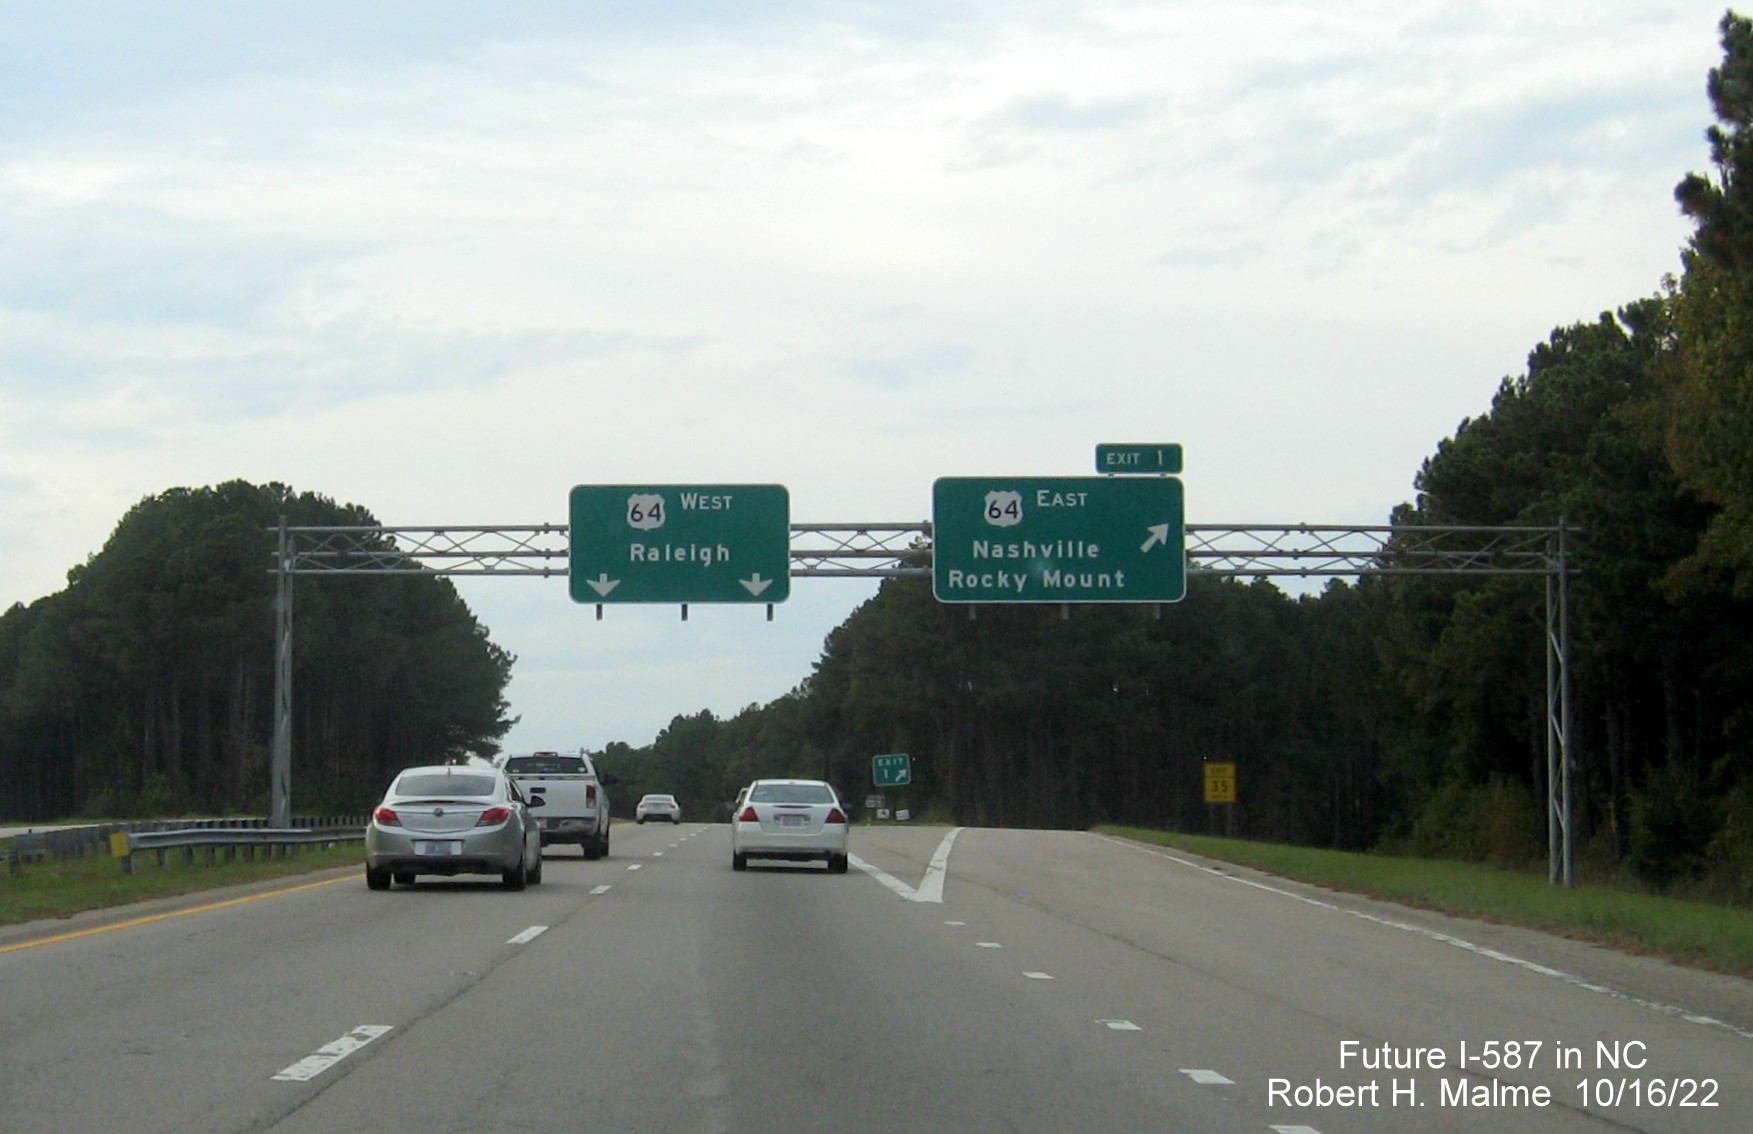 Image of overhead ramp sign for US 64 East exit with new Future I-587 mileage exit number, October 2022